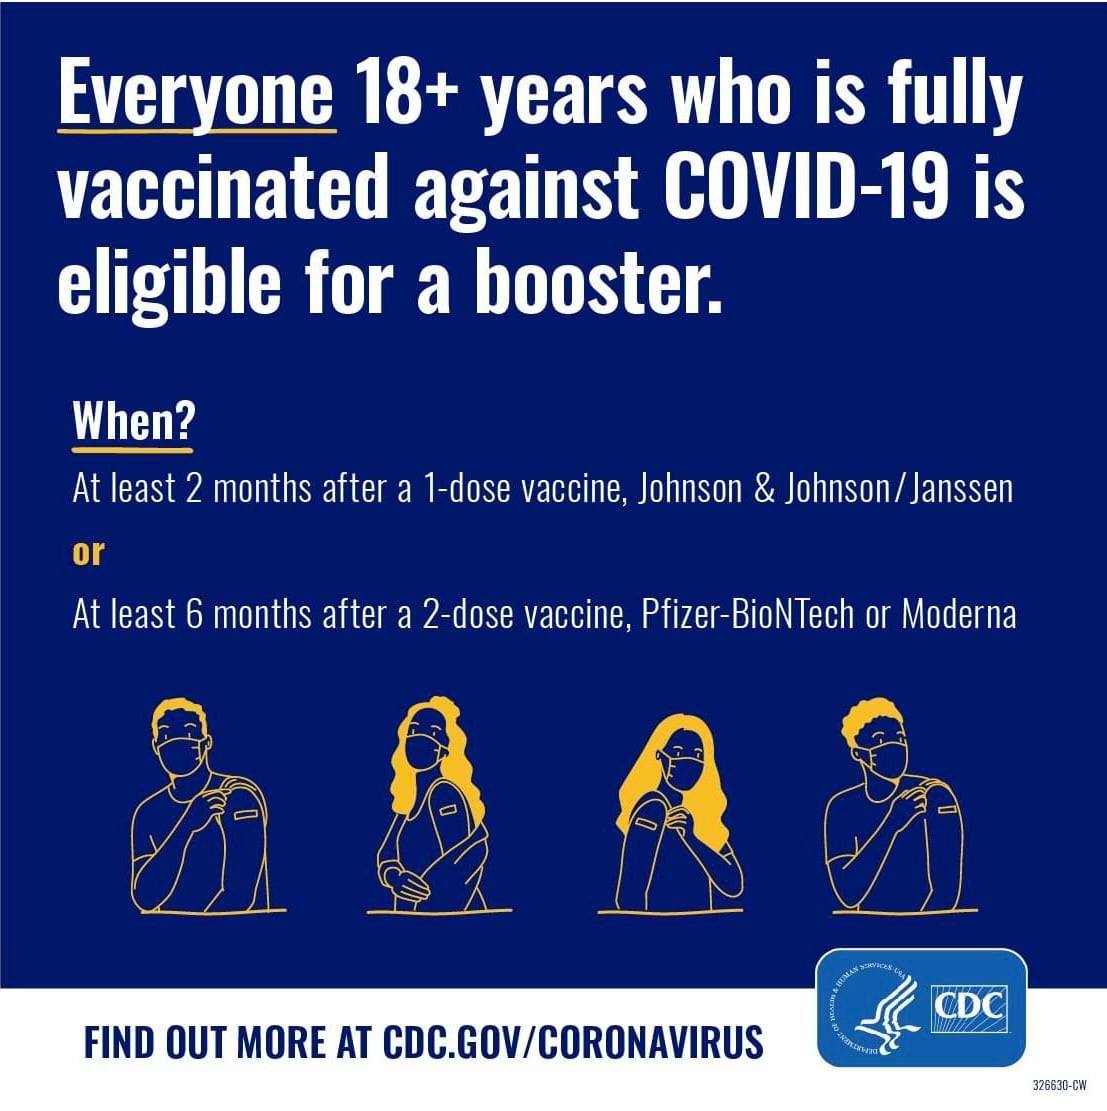 Every 18+ years who is fully vaccinated against COVID-19 is eligible for a booster.